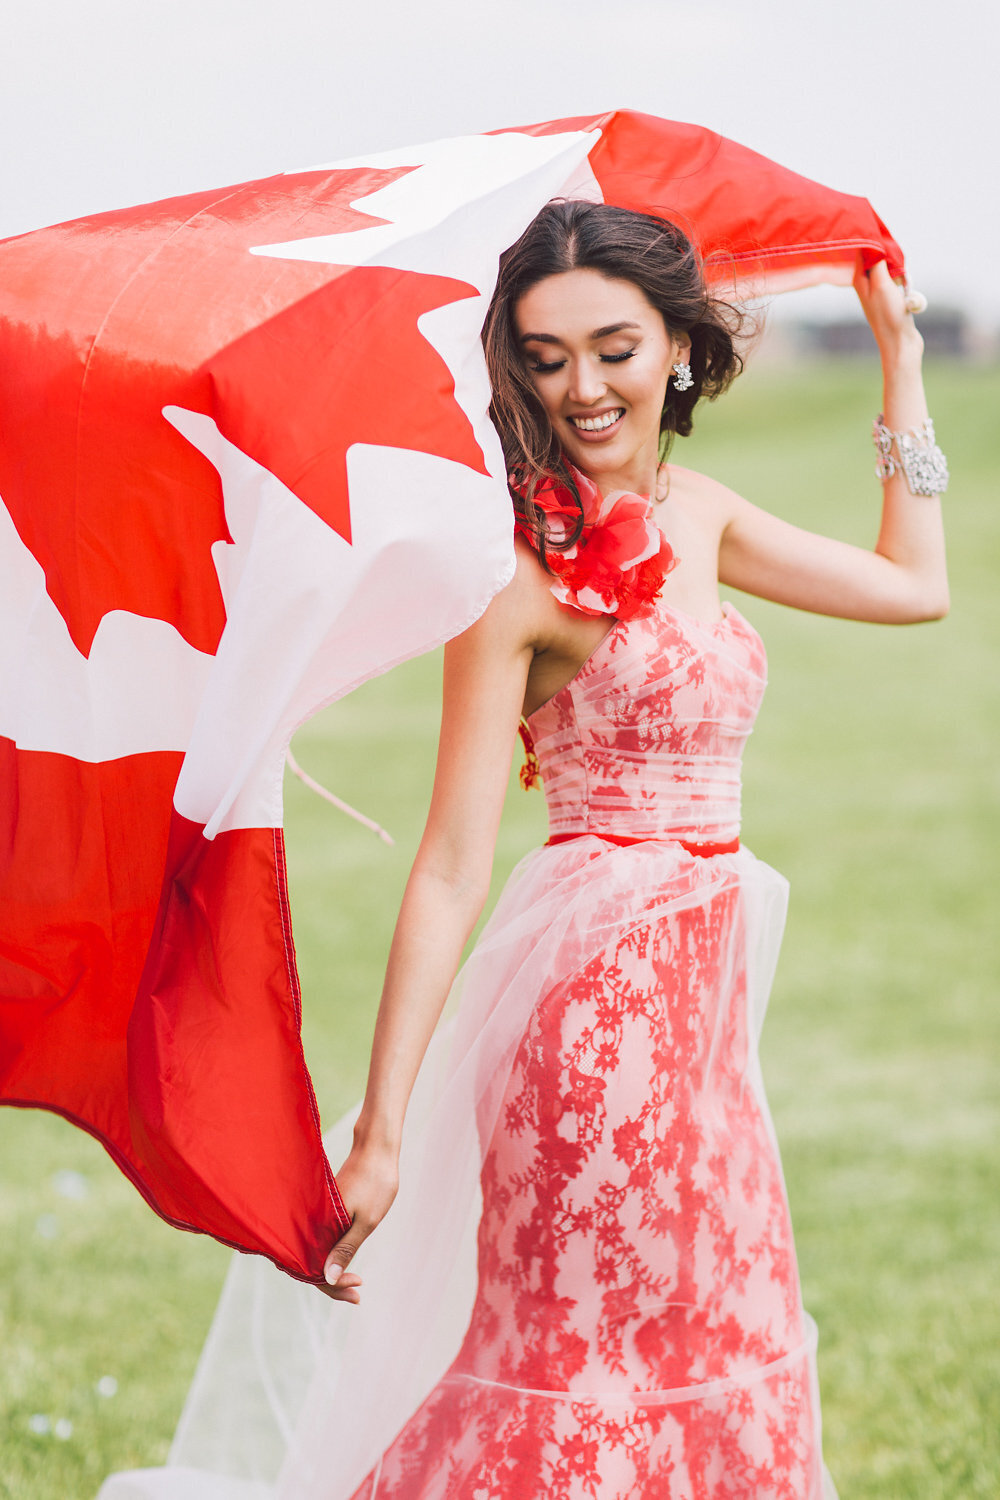 DianaPiresEvents-CanadawithLove8